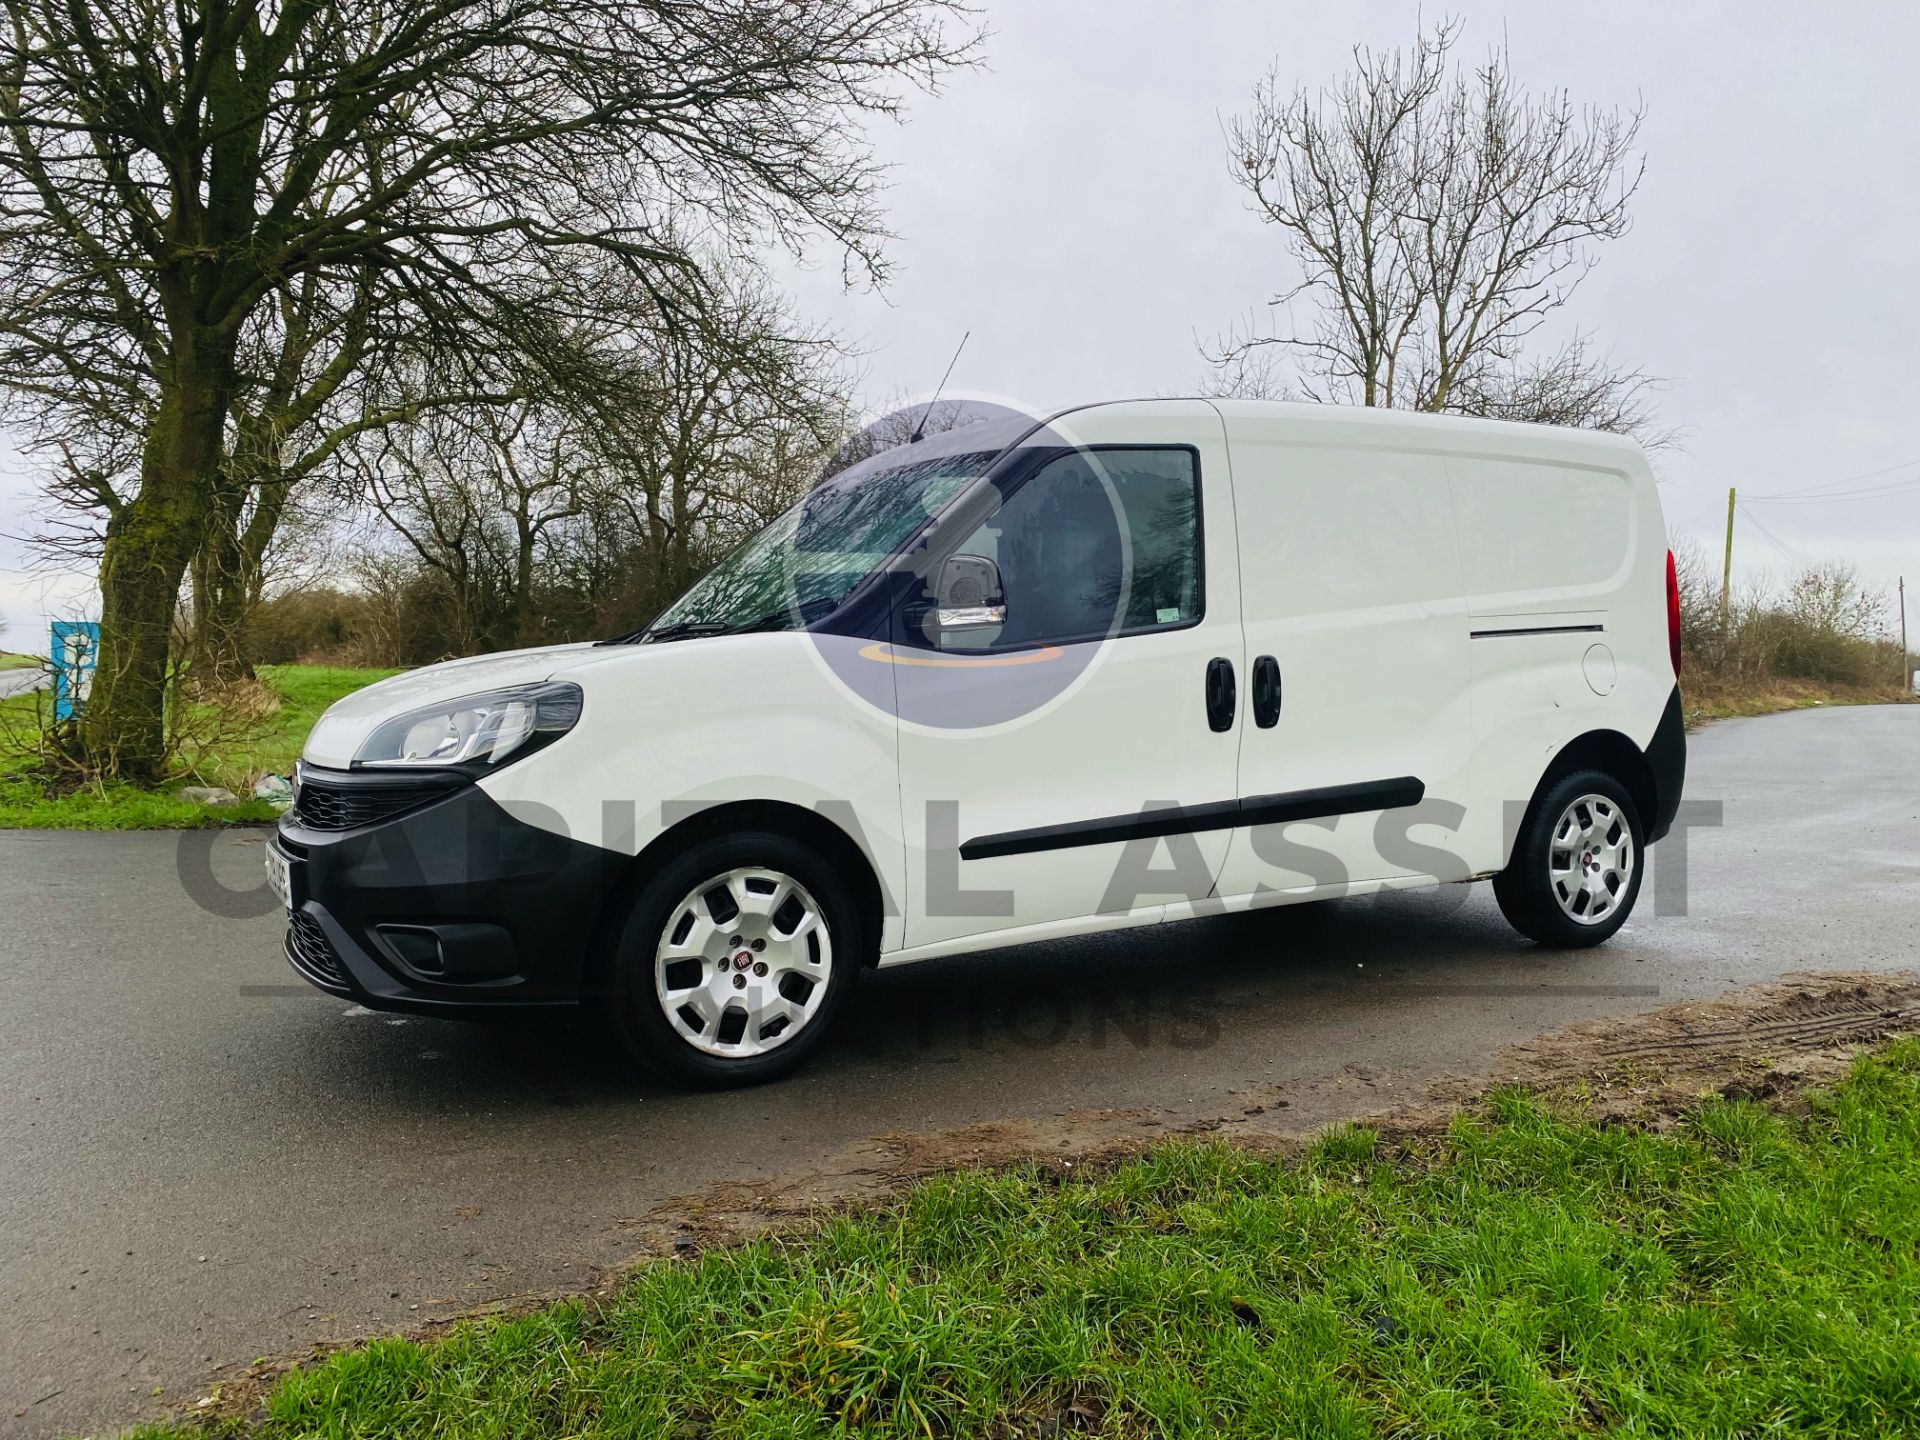 FIAT DOBLO 1.6 MULTIJET LWB "EURO 6" AIR CON - ONLY 46793 MILES! - 19 REG - (NEW SHAPE) - - Image 5 of 23